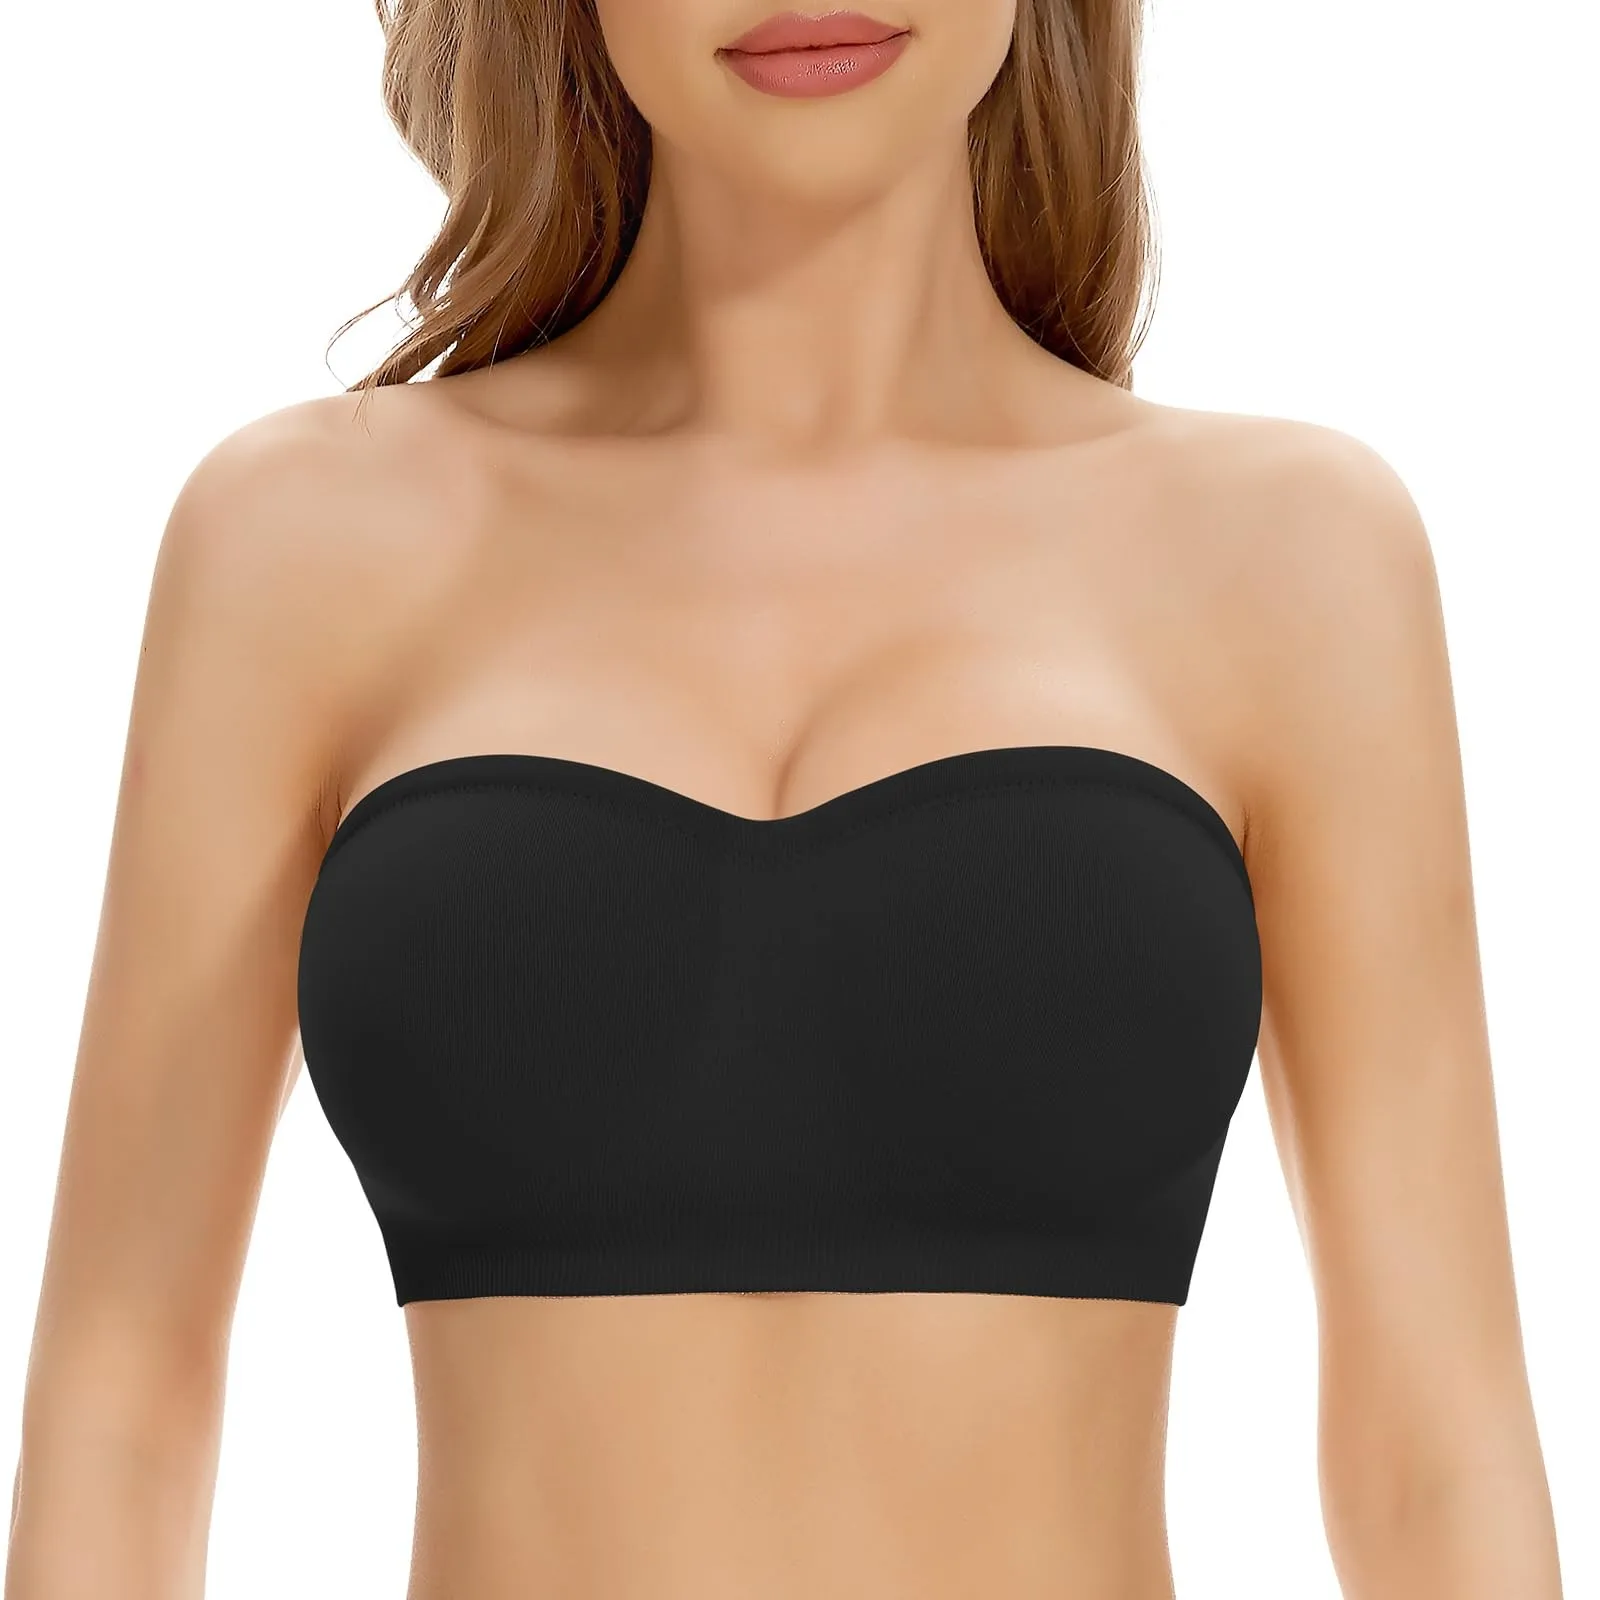 

Strapless Bra For Women's Padded Bandeau Bra Non-Slip Silicone Seamless Wireless Tube Top Bras Bralette Without Underwire